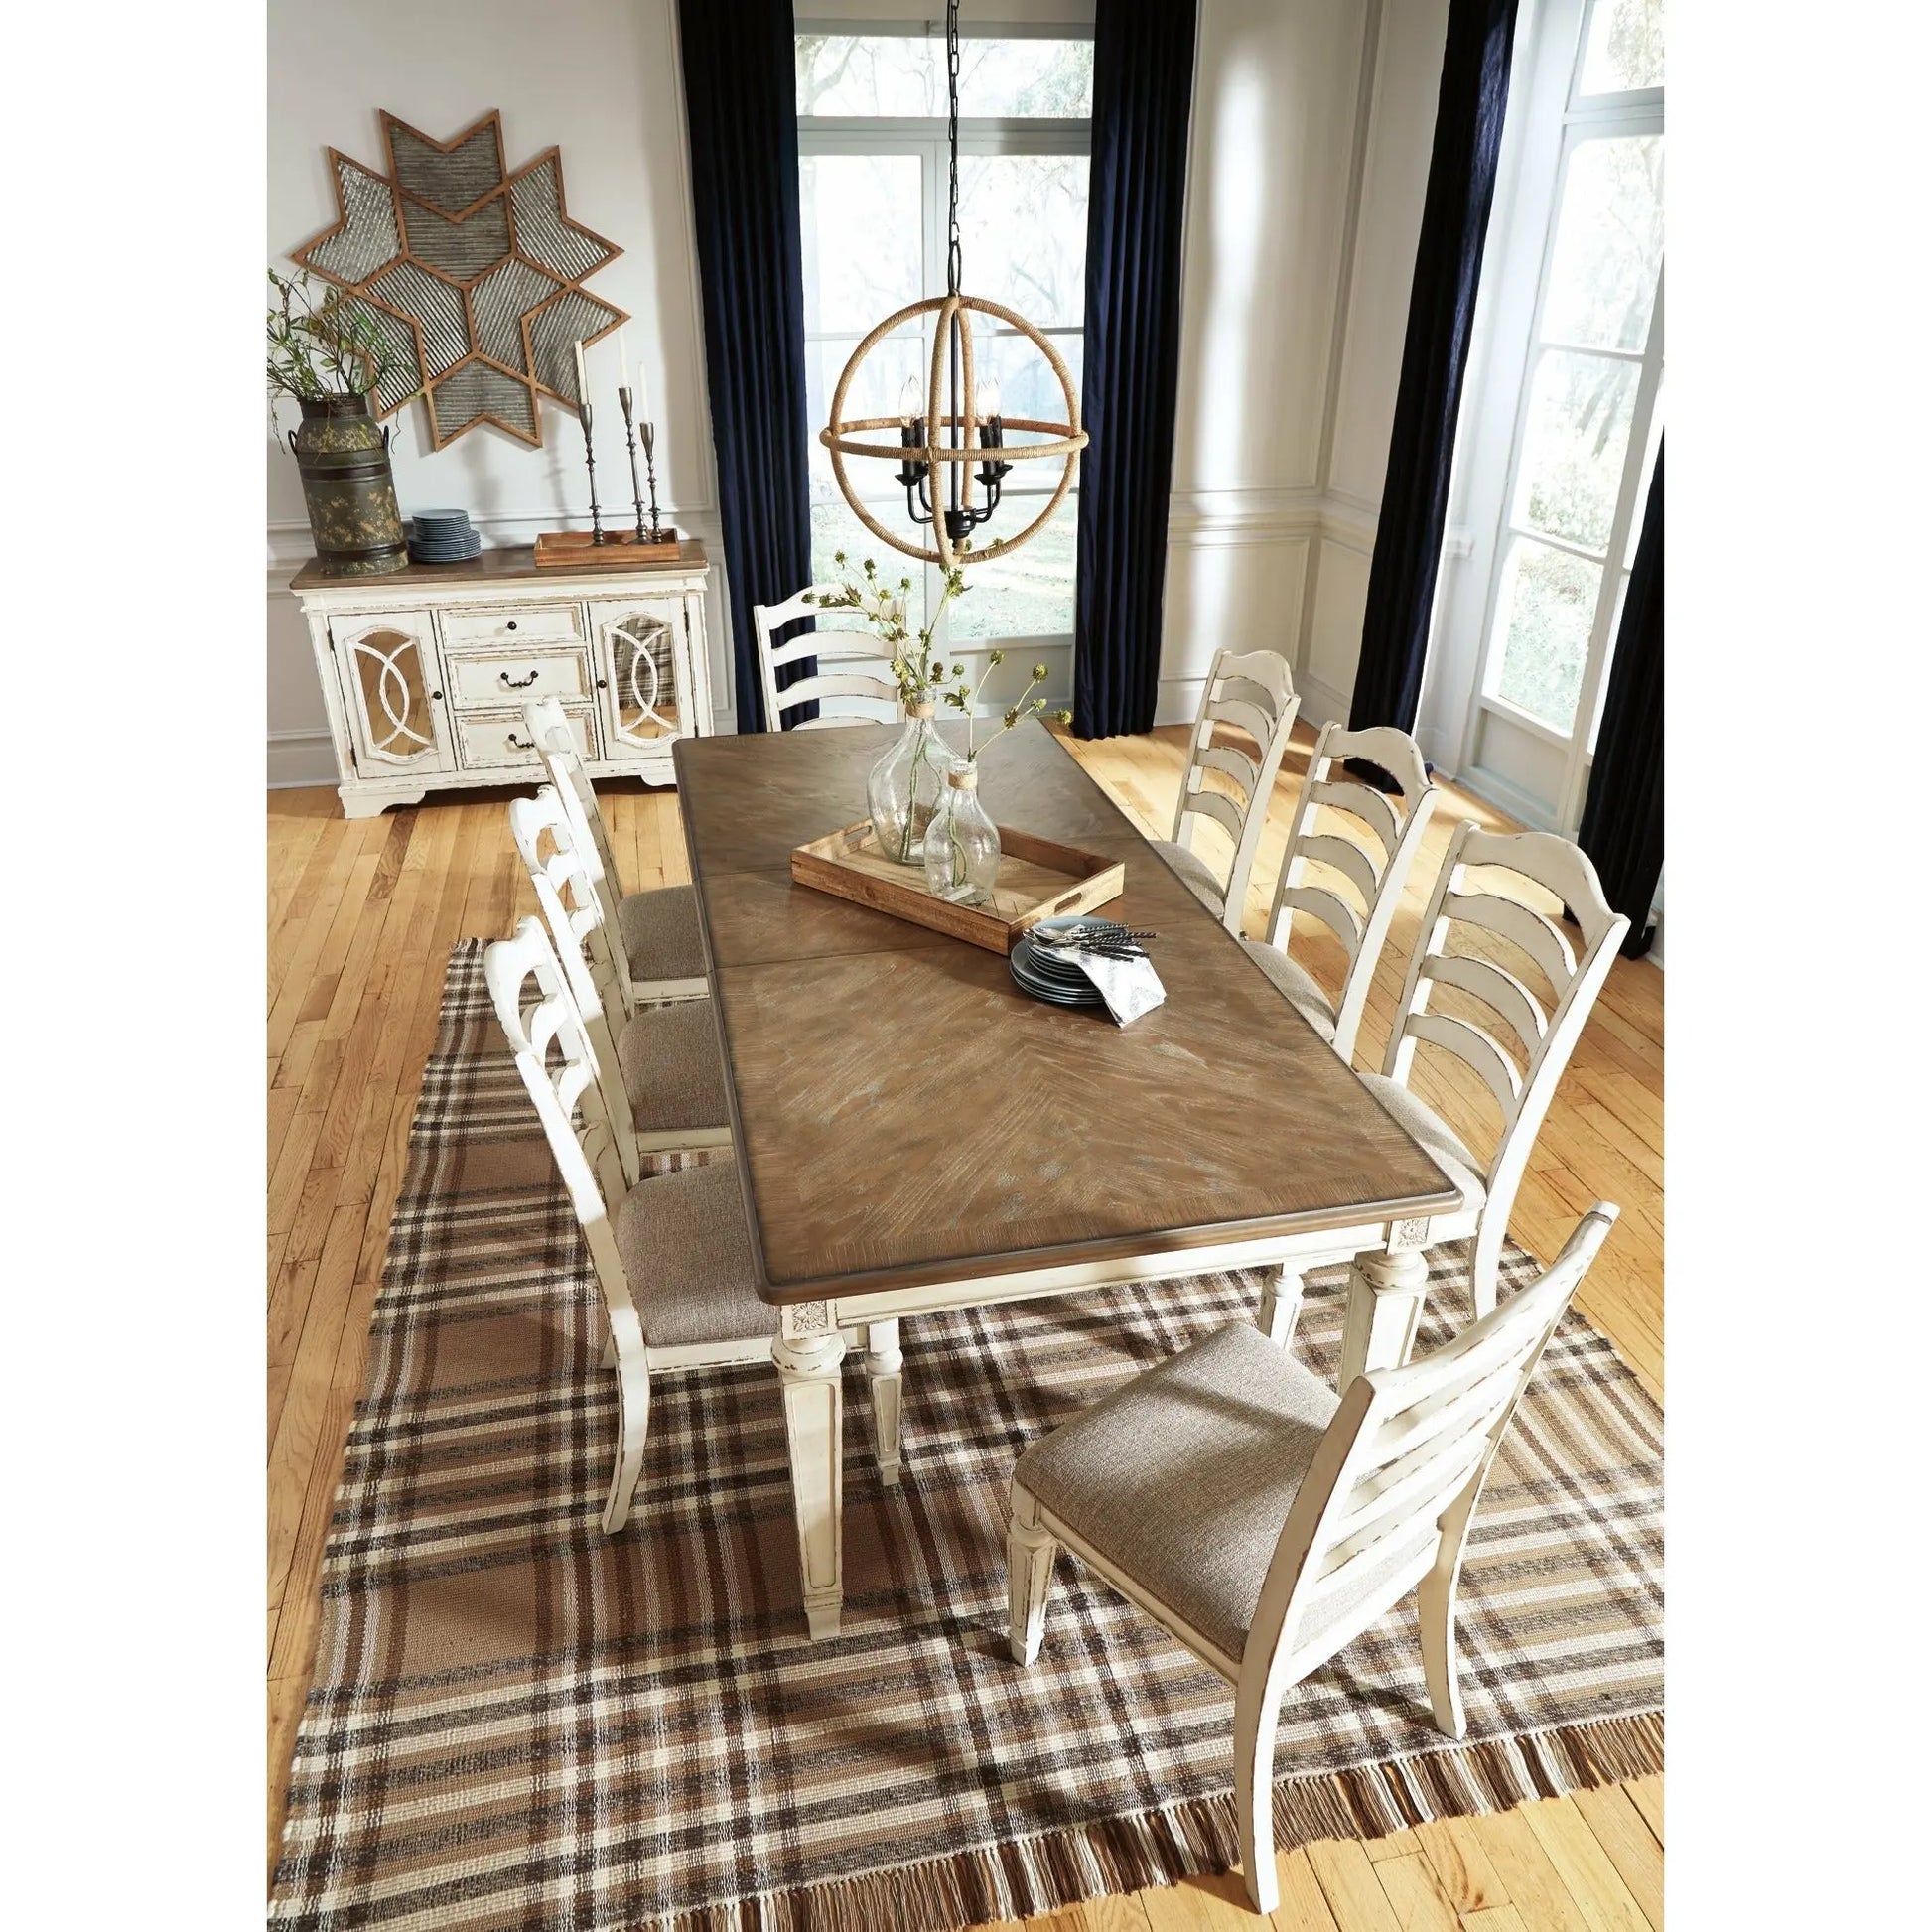 Realyn RECT Dining Room EXT Table DINING TABLE